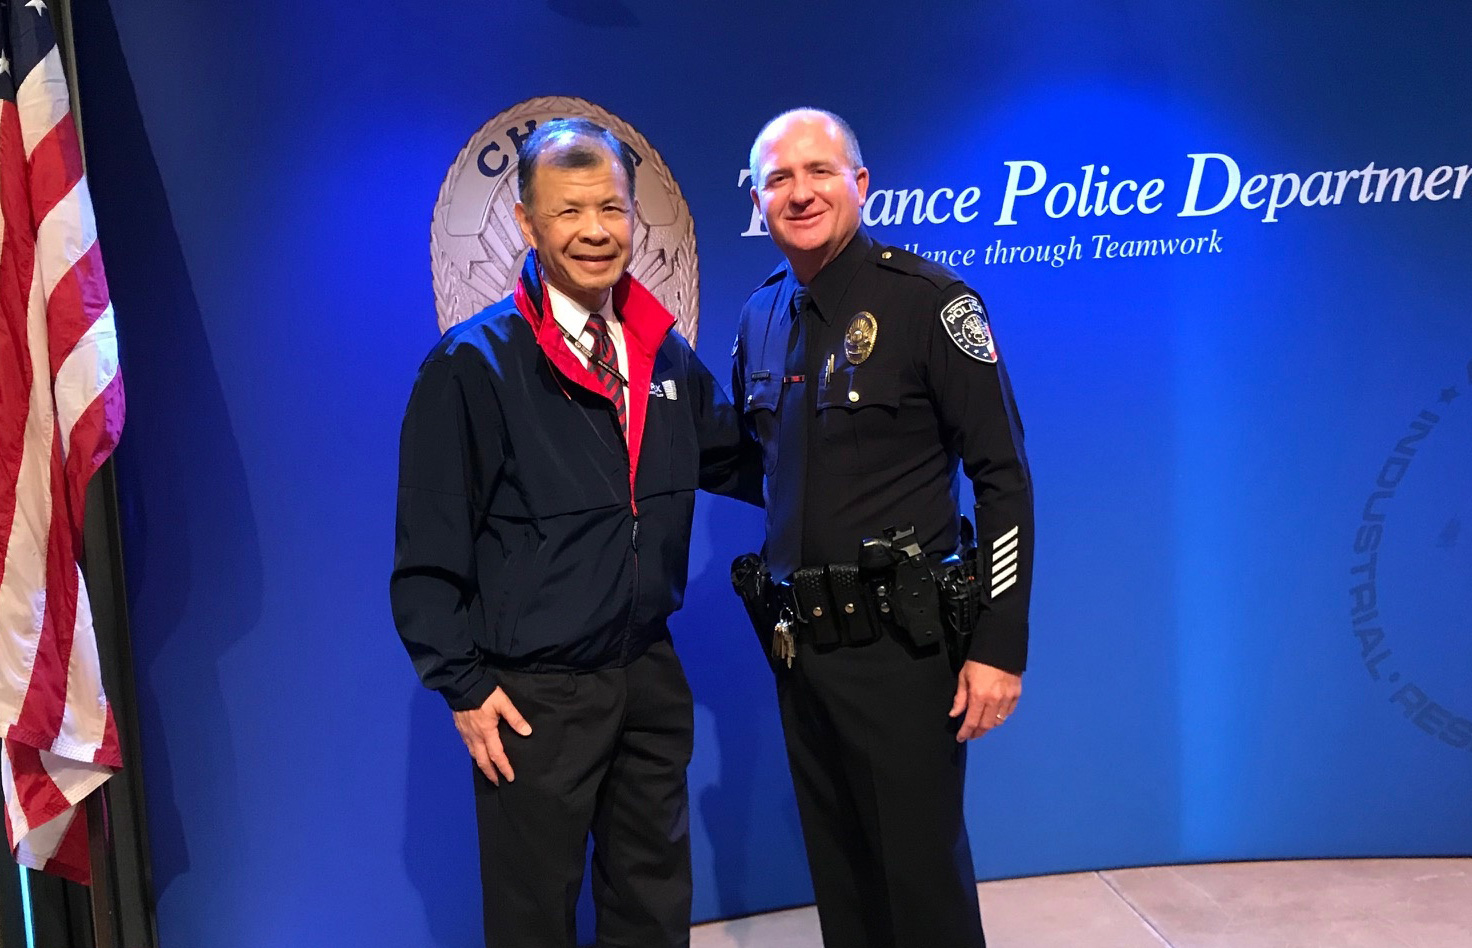 Arnold Ng at the Torrance Area Chamber of Commerce event honoring Torrance Police Department